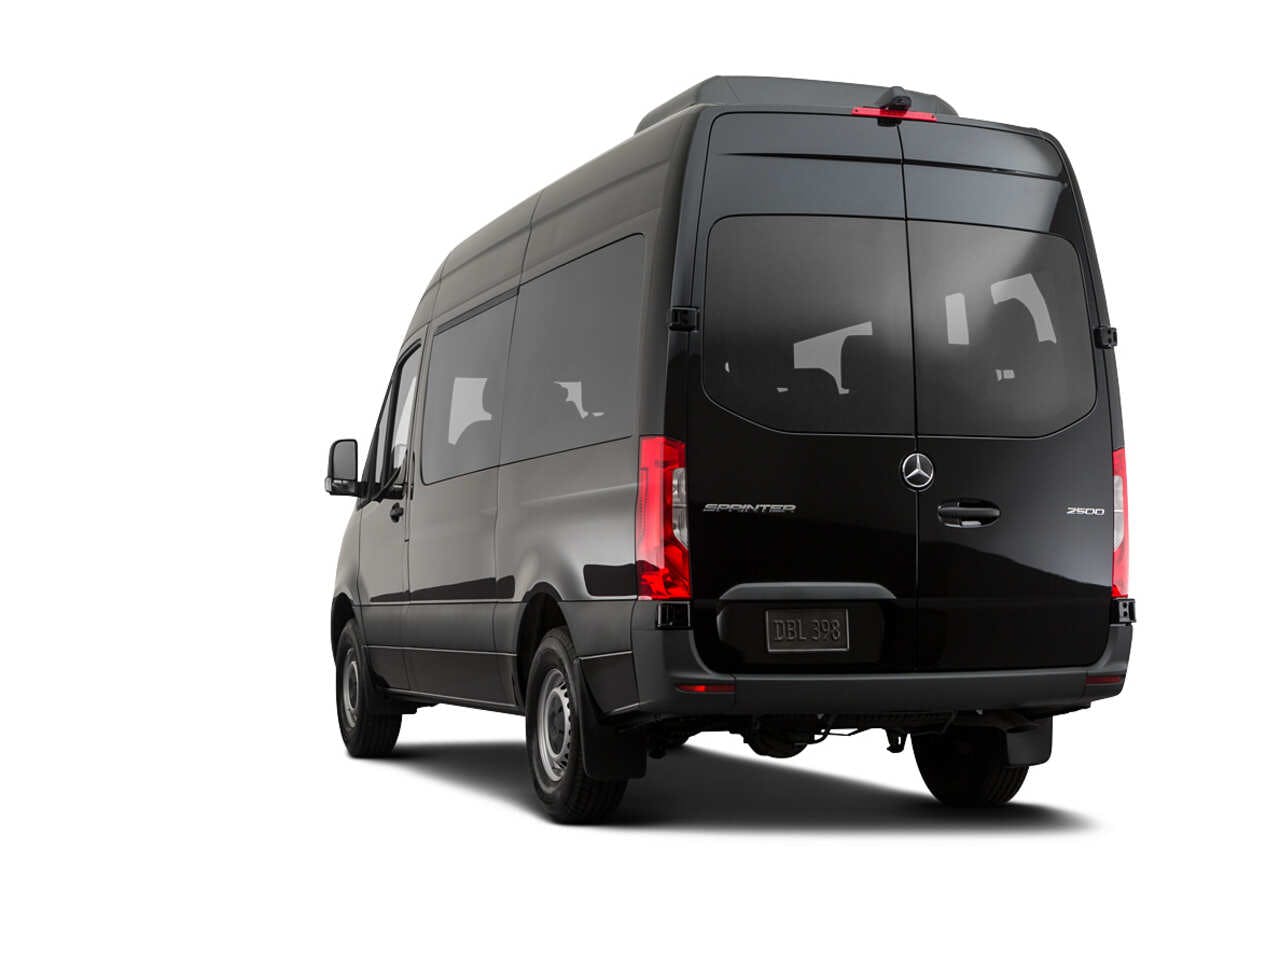 2023 Mercedes-Benz Sprinter Prices, Reviews, and Pictures